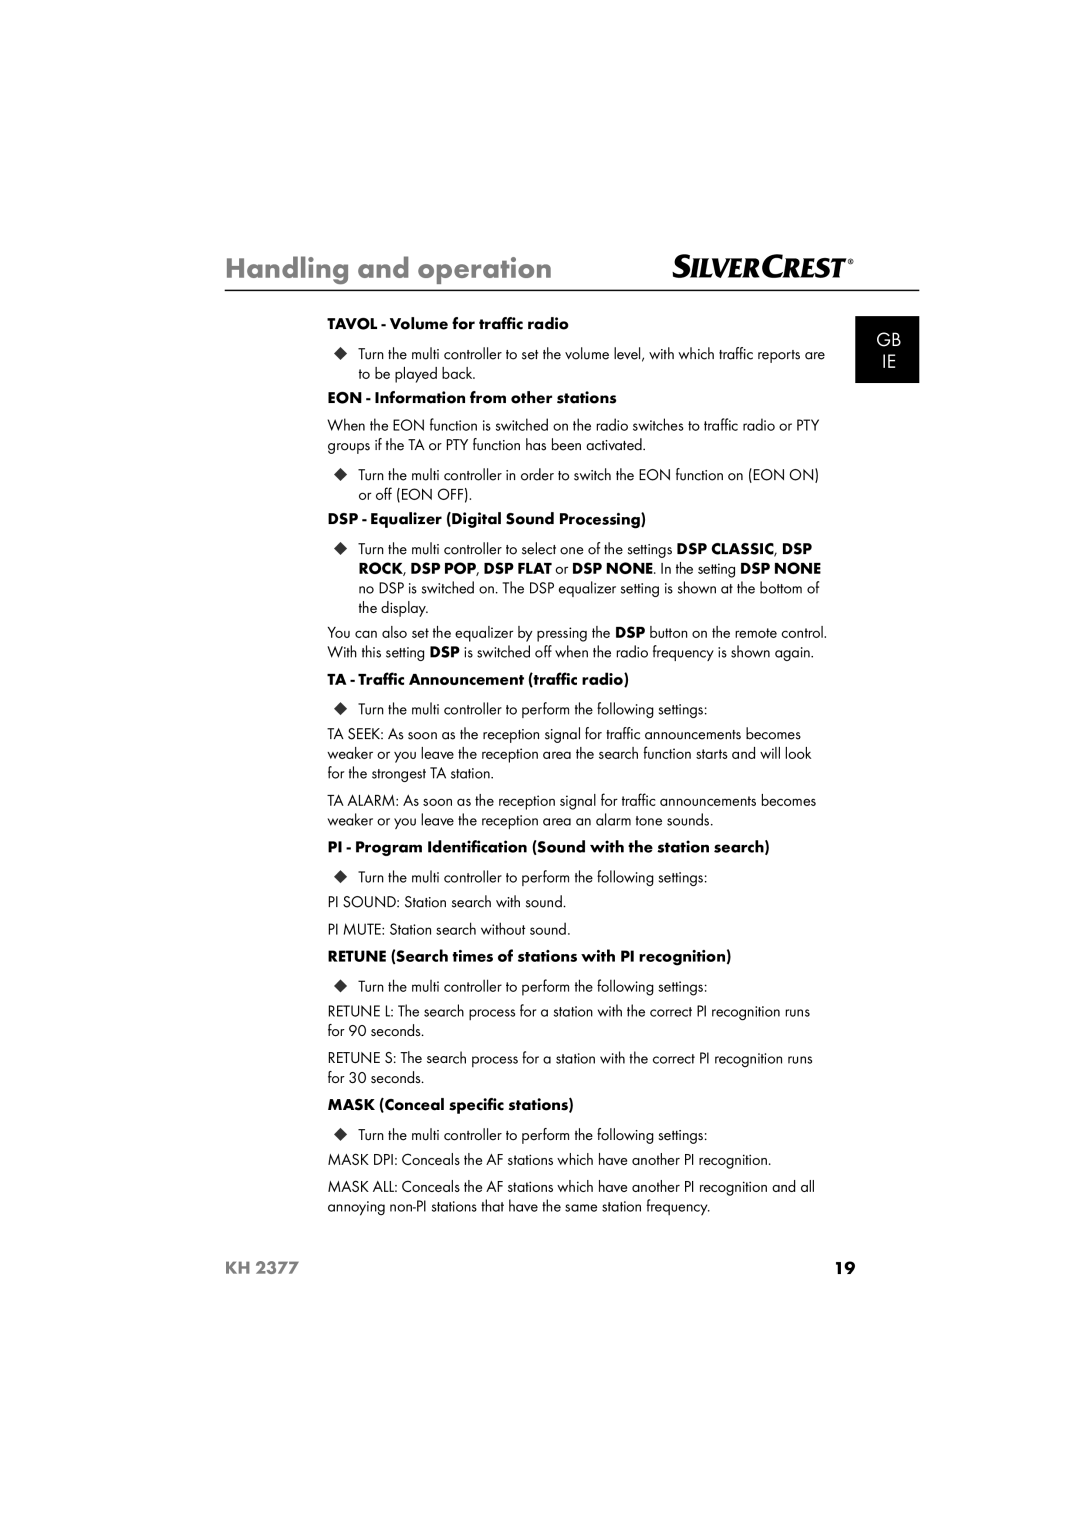 Silvercrest KH 2377 operating instructions Handling and operation 